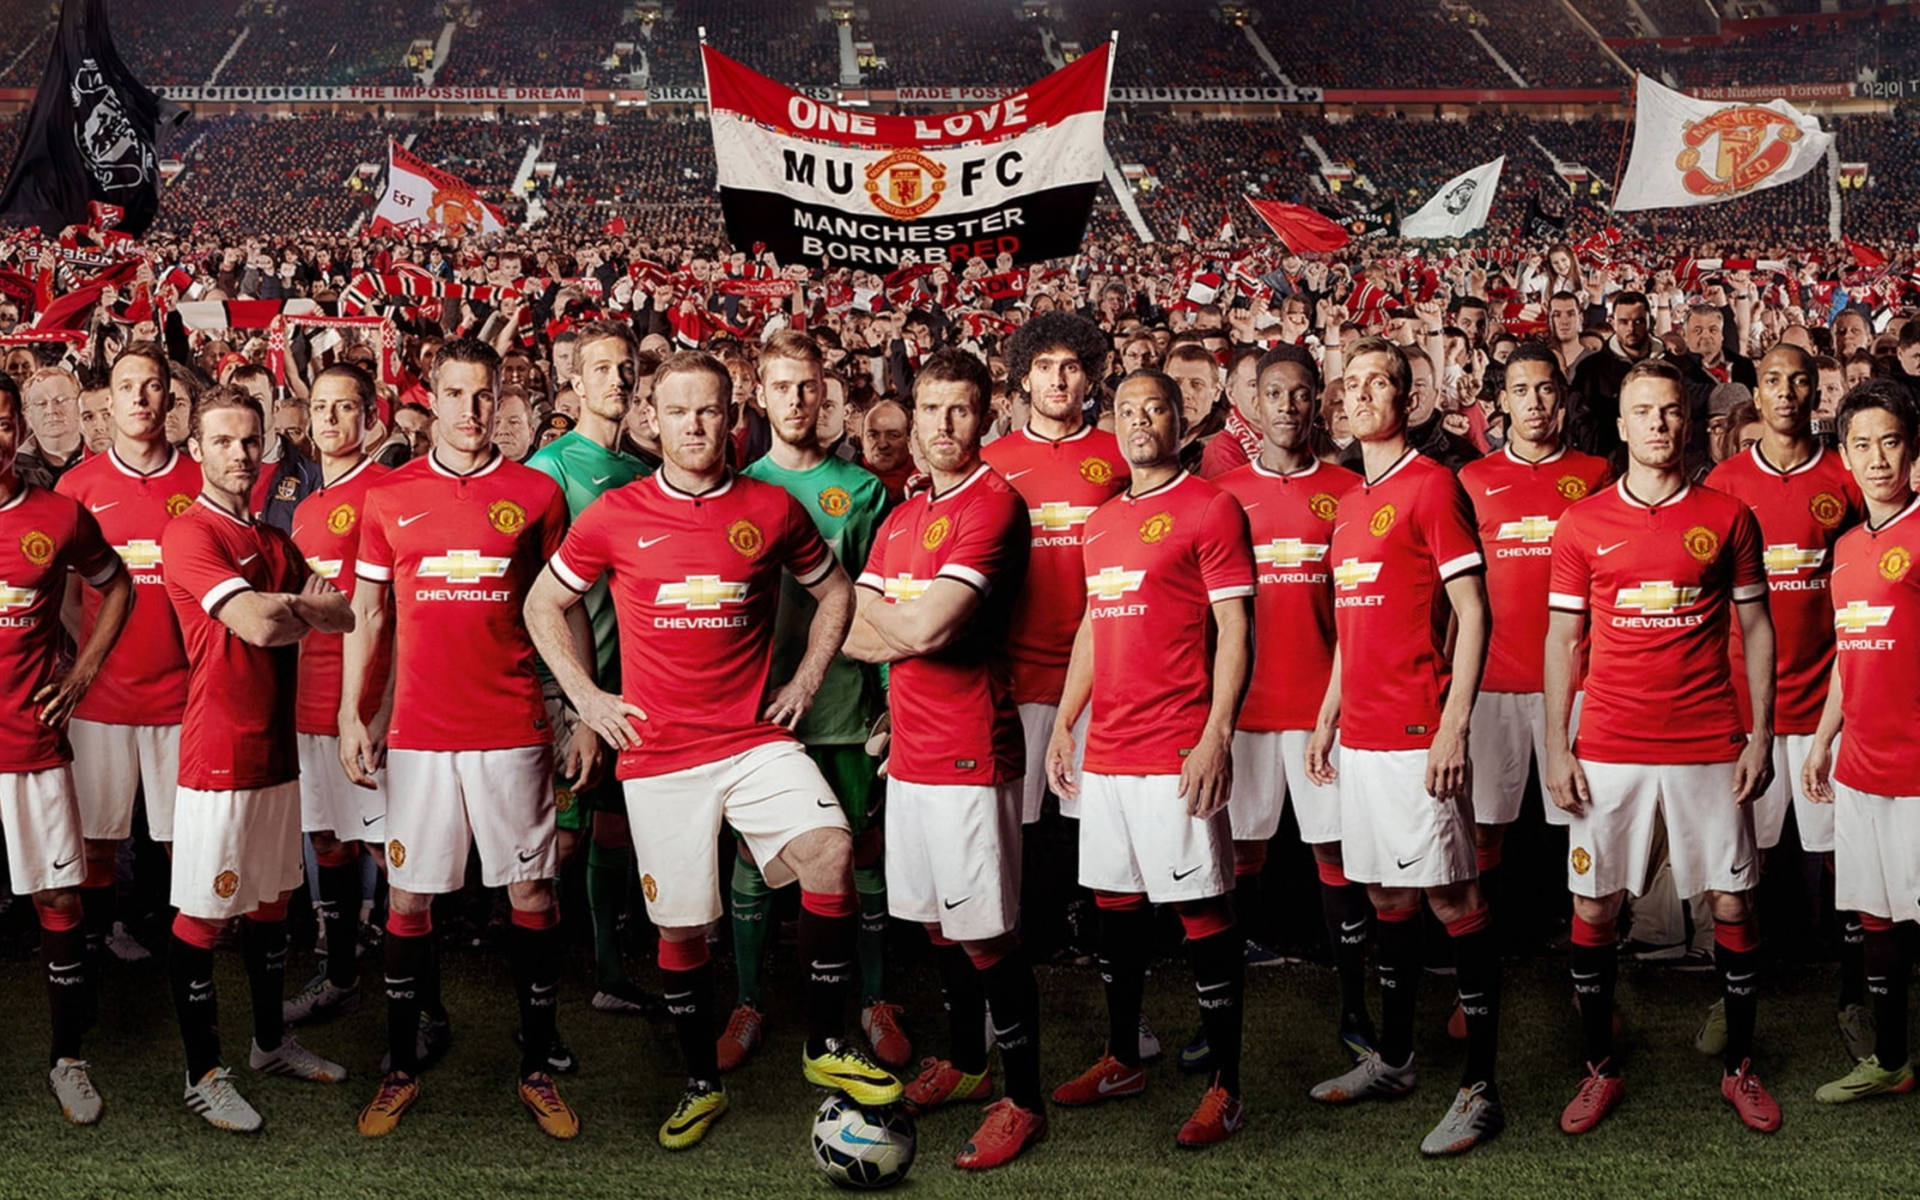 Free Manchester United Players Wallpaper Downloads, [200+] Manchester  United Players Wallpapers for FREE 